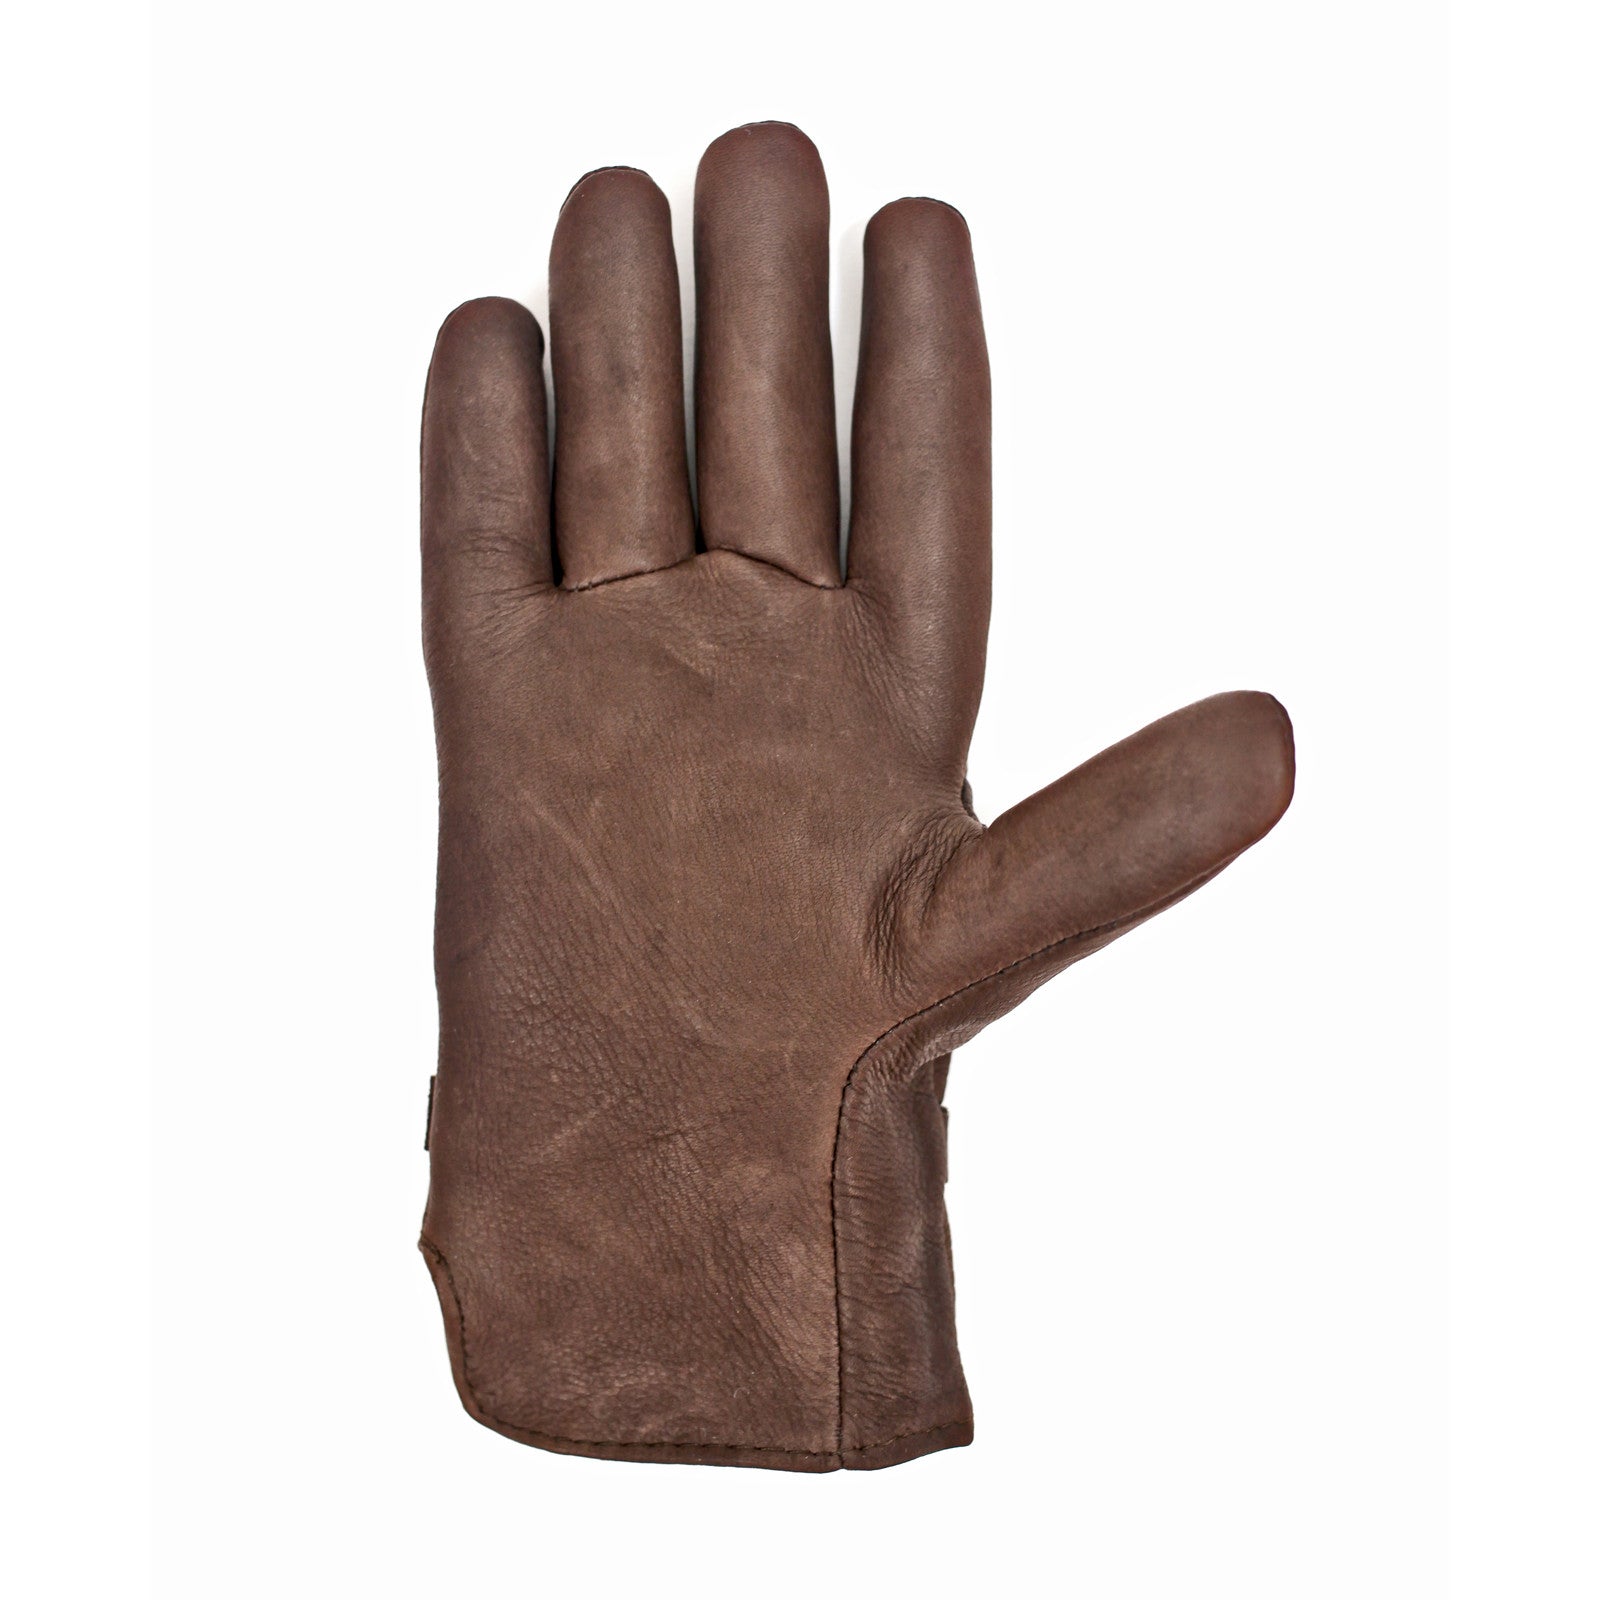 leather glove, made in usa glove, brown leather glove, geier glove, red clouds glove, moto glove, motorcycle gloves, thin leather gloves